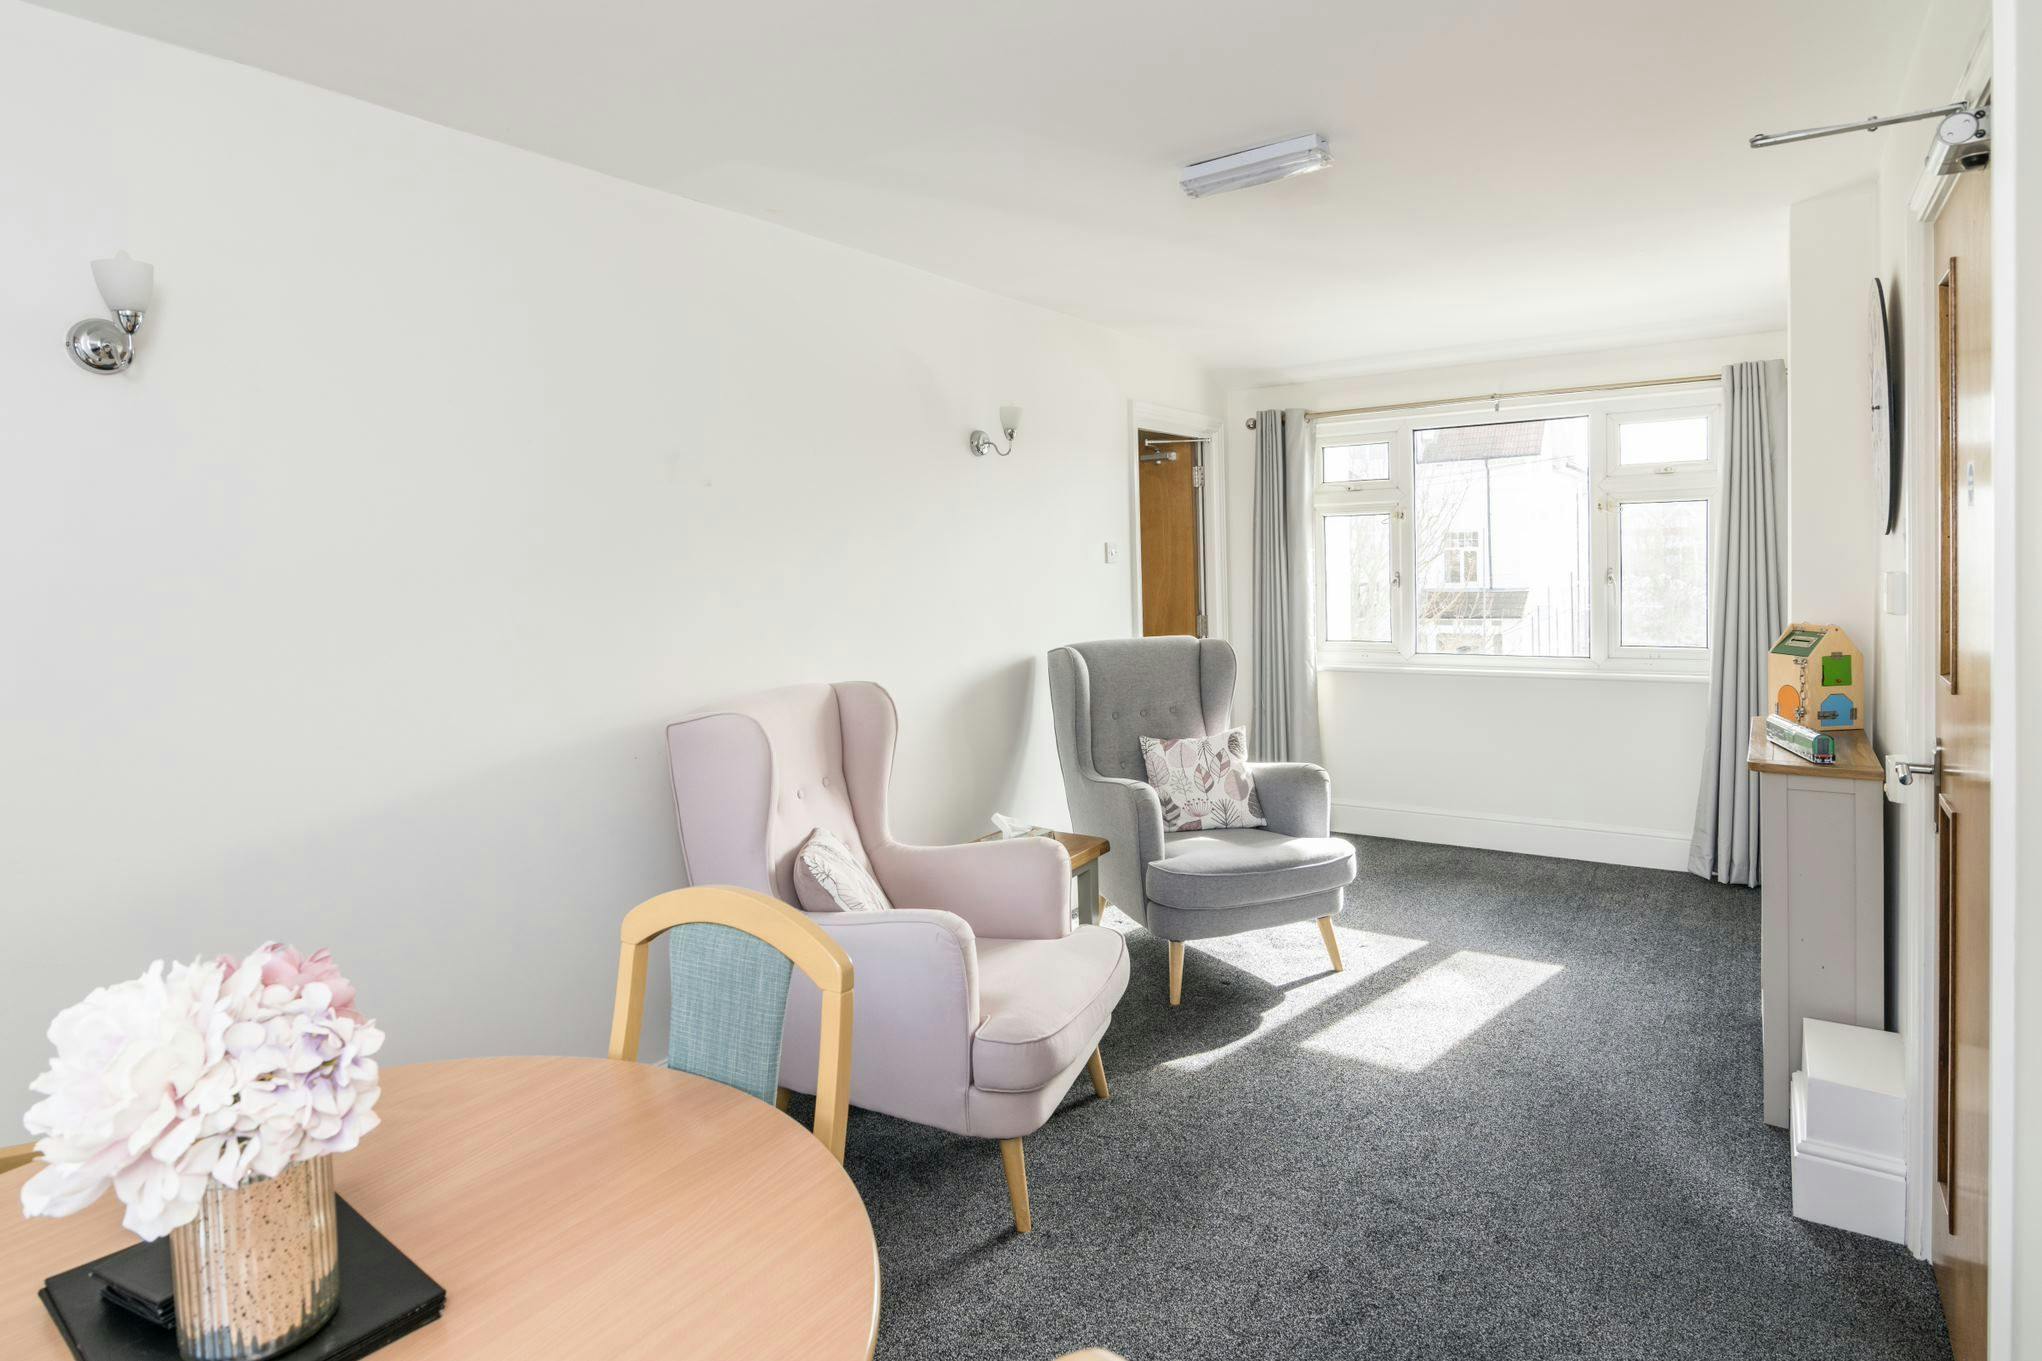 St Nectans Care Home -Image 9